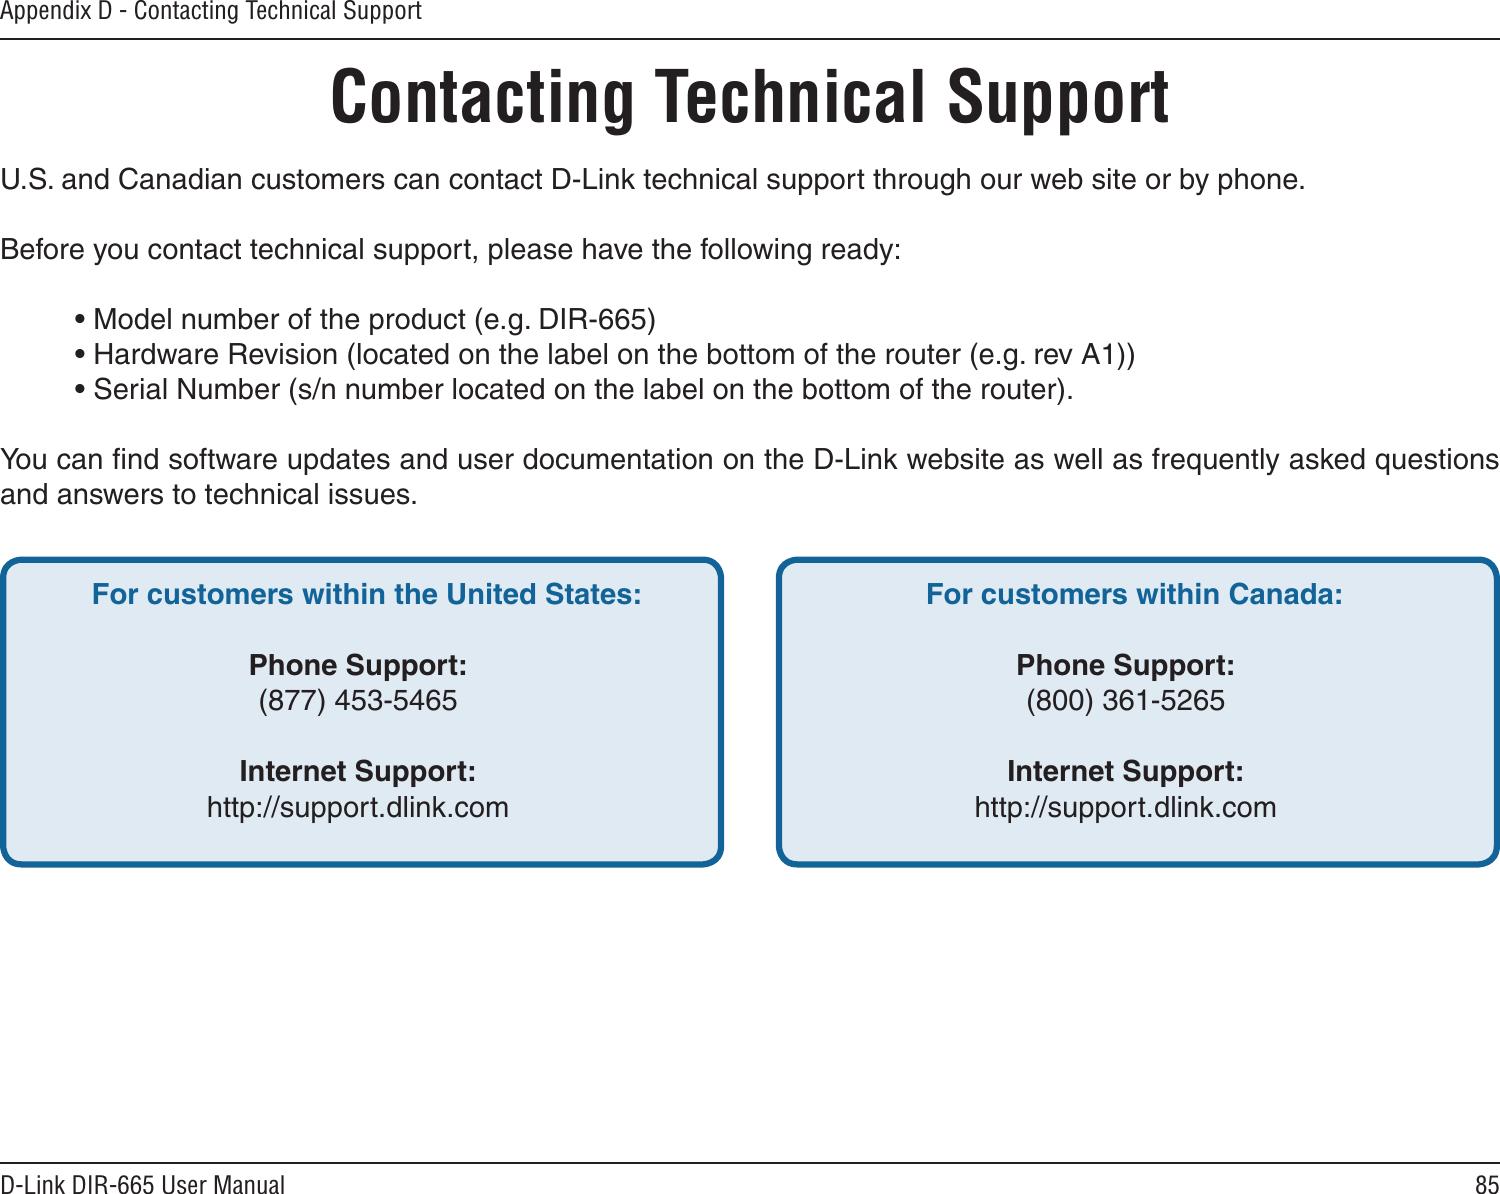 85D-Link DIR-665 User ManualAppendix D - Contacting Technical SupportContacting Technical SupportU.S. and Canadian customers can contact D-Link technical support through our web site or by phone.Before you contact technical support, please have the following ready:  • Model number of the product (e.g. DIR-665)  • Hardware Revision (located on the label on the bottom of the router (e.g. rev A1))  • Serial Number (s/n number located on the label on the bottom of the router). You can ﬁnd software updates and user documentation on the D-Link website as well as frequently asked questions and answers to technical issues.For customers within the United States: Phone Support:(877) 453-5465Internet Support:http://support.dlink.com For customers within Canada: Phone Support:(800) 361-5265 Internet Support:http://support.dlink.com